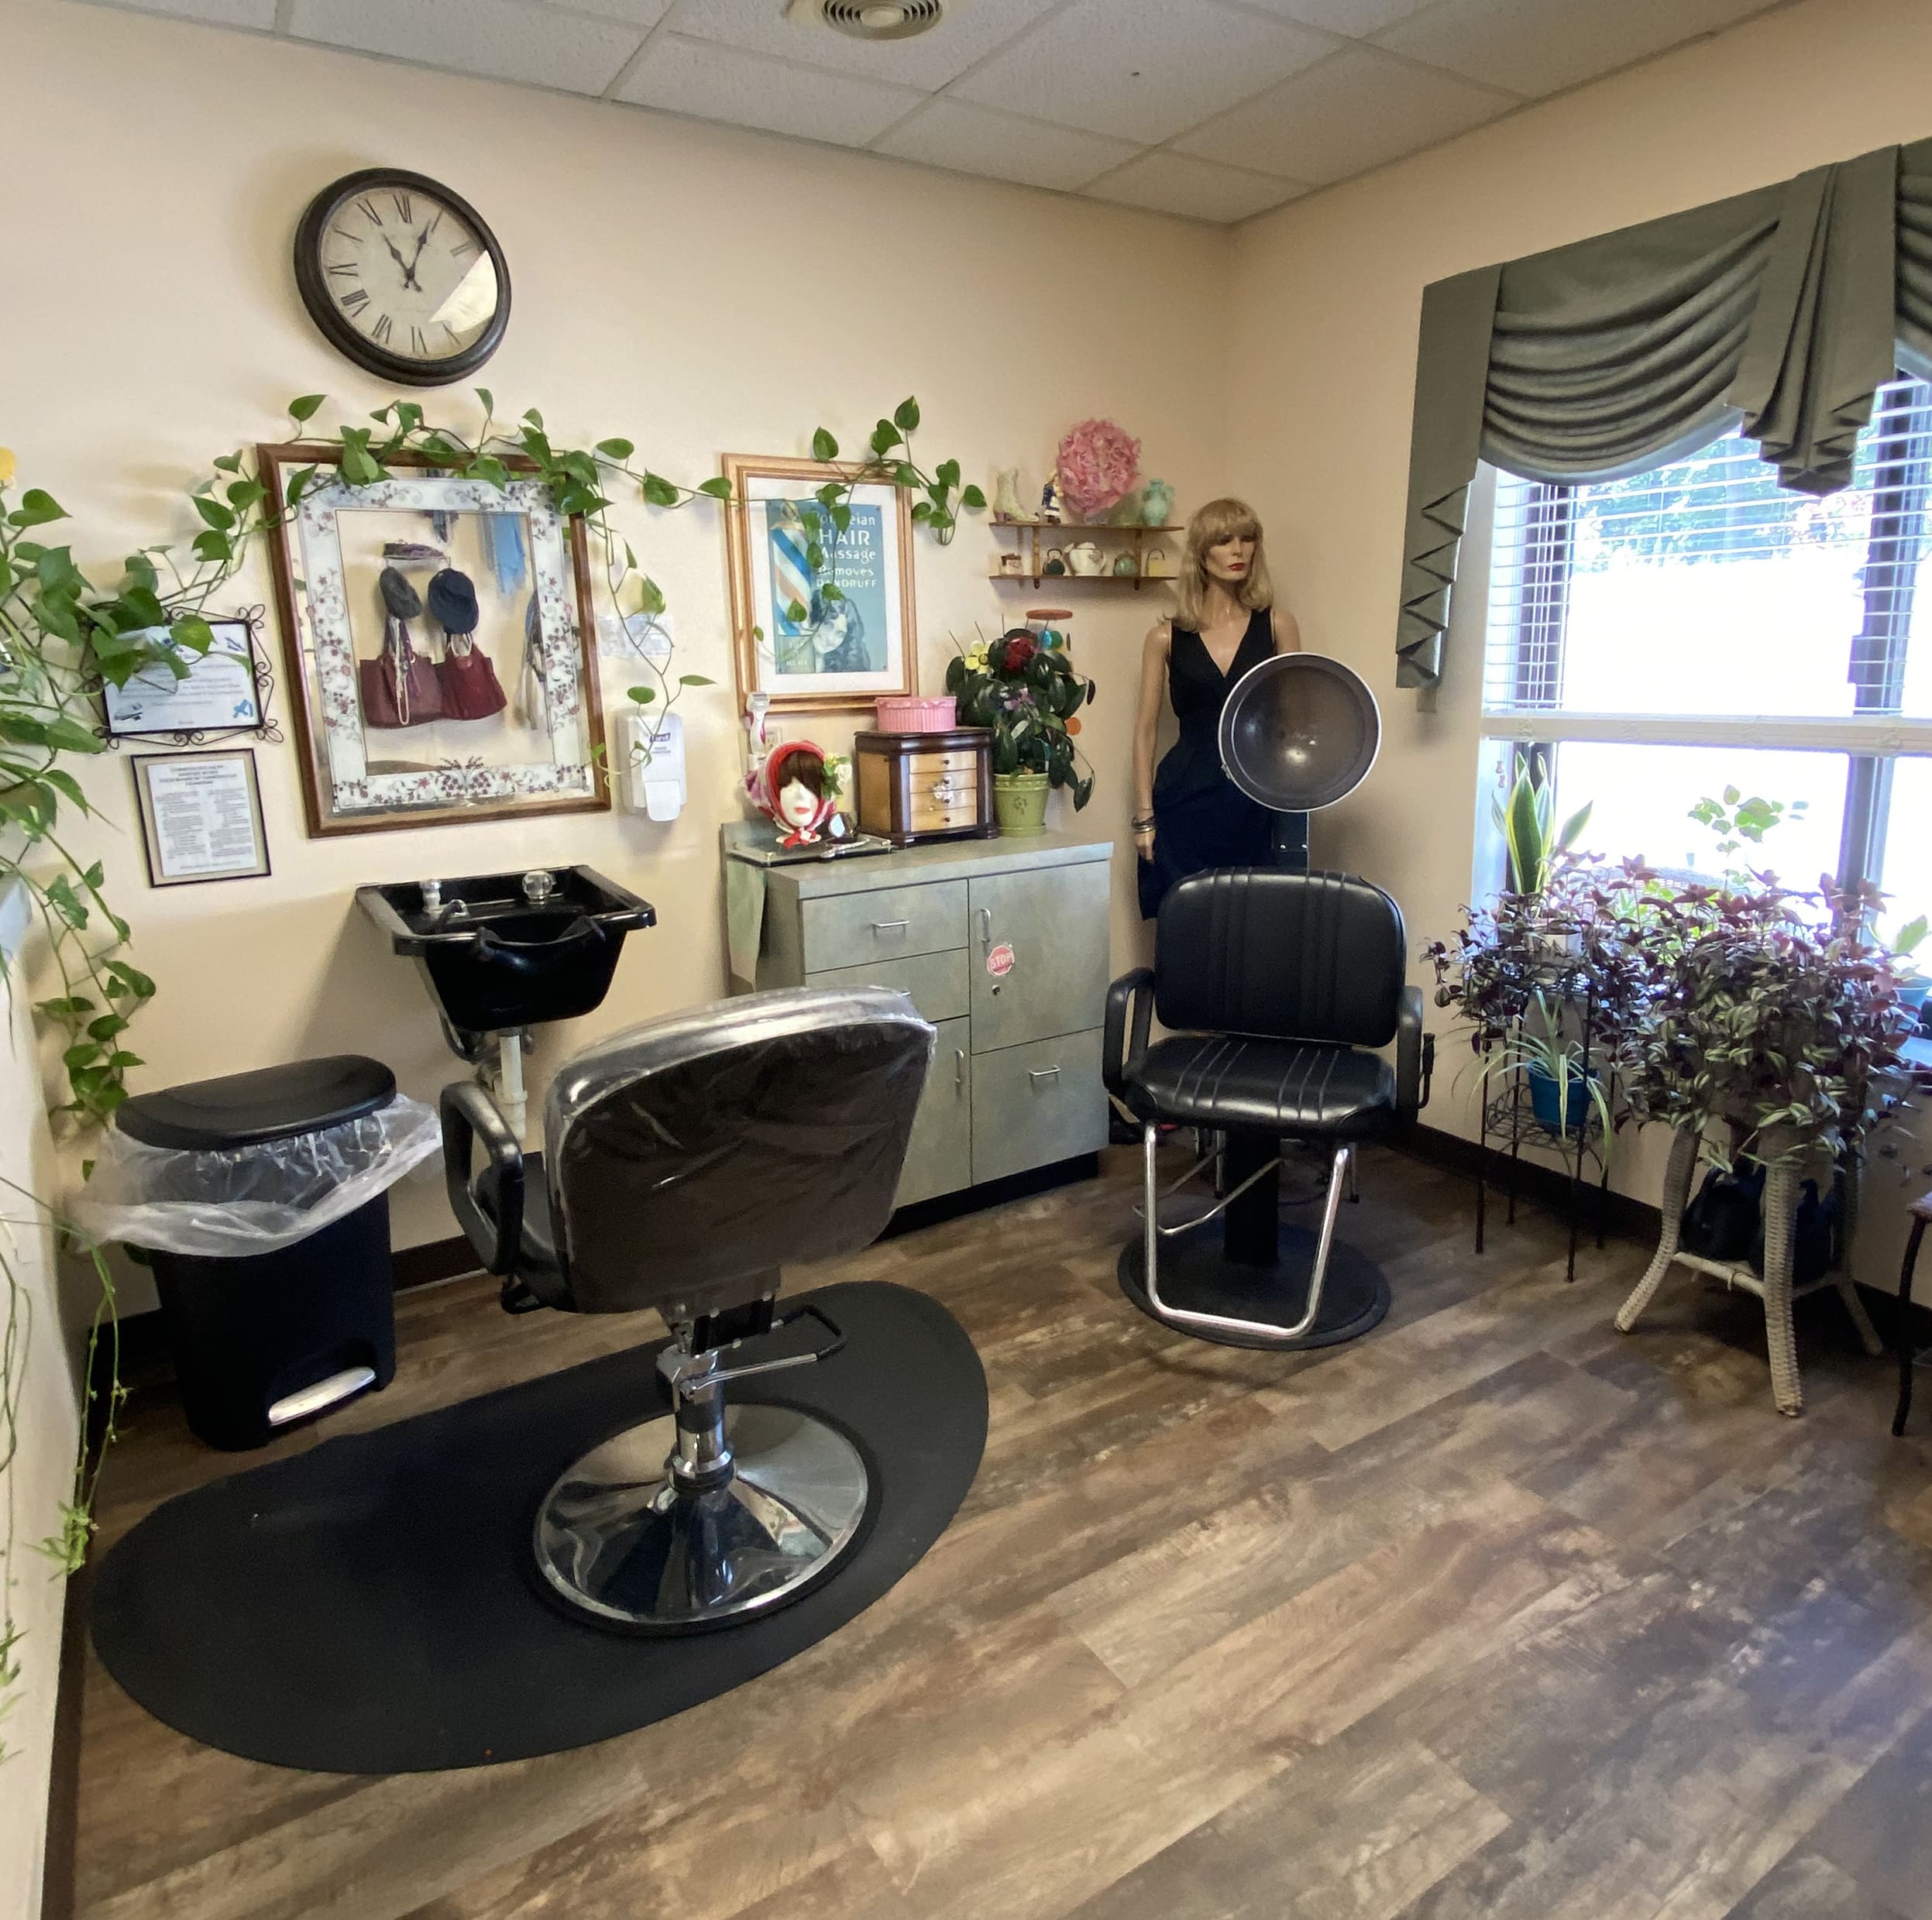 Brickyard Healthcare Woodlands Care Center salon with chairs and decor